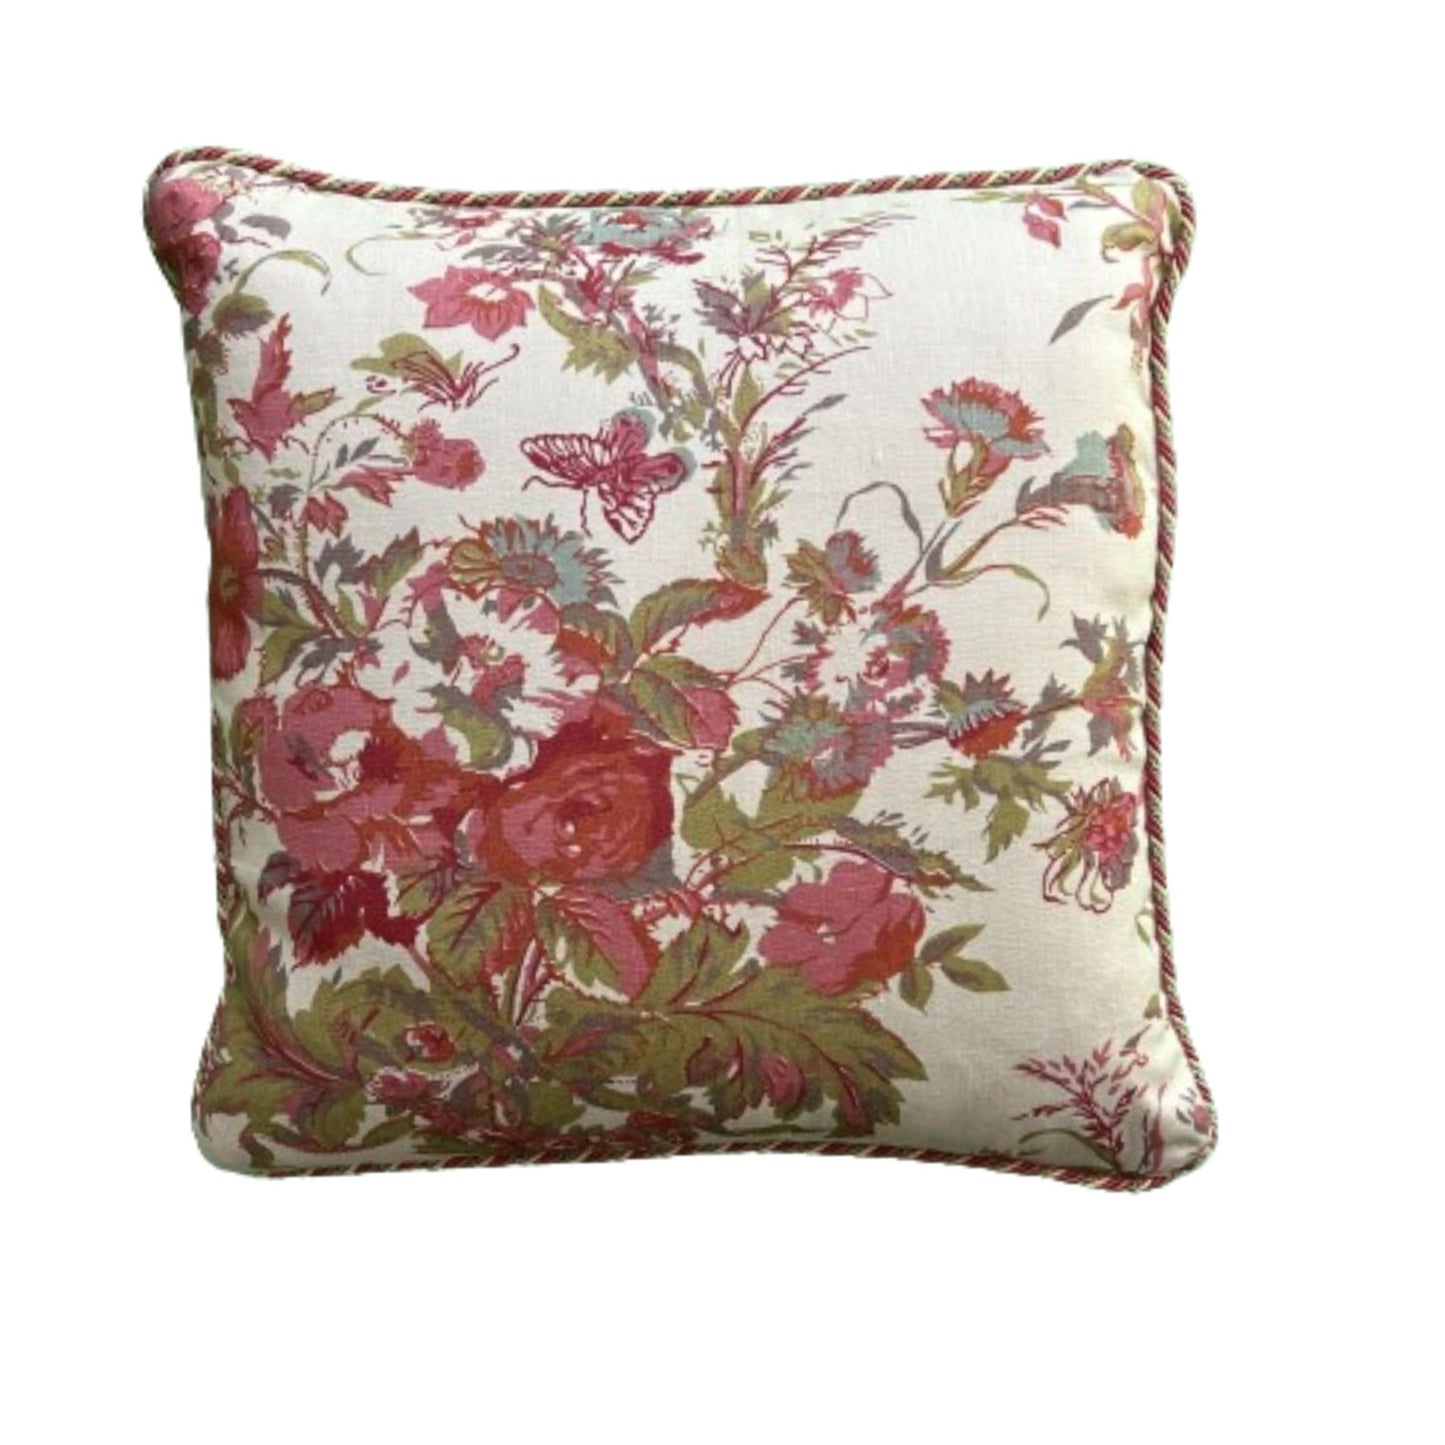 Roses and Mint 18 x 18 Square Linen Designer Pillow with Down Feather Insert